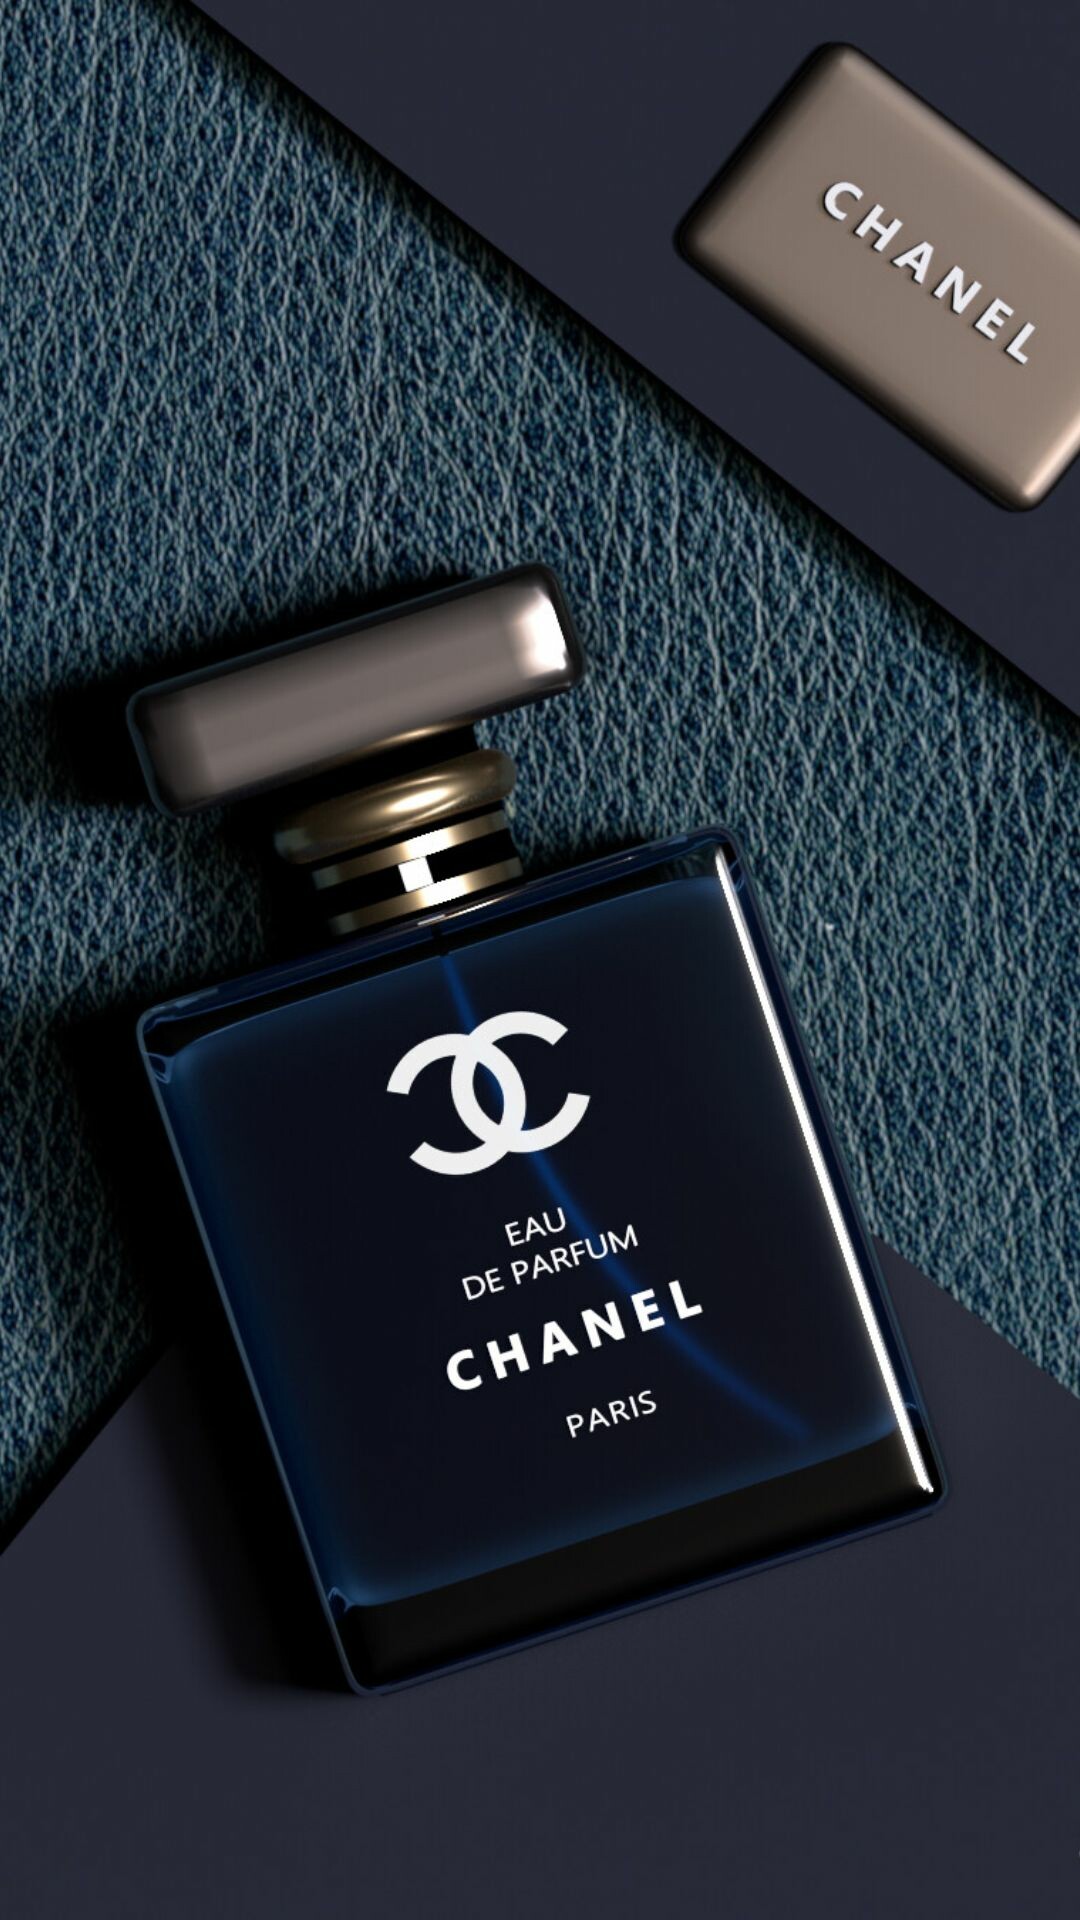 Chanel: The premier French fashion house. 1080x1920 Full HD Background.